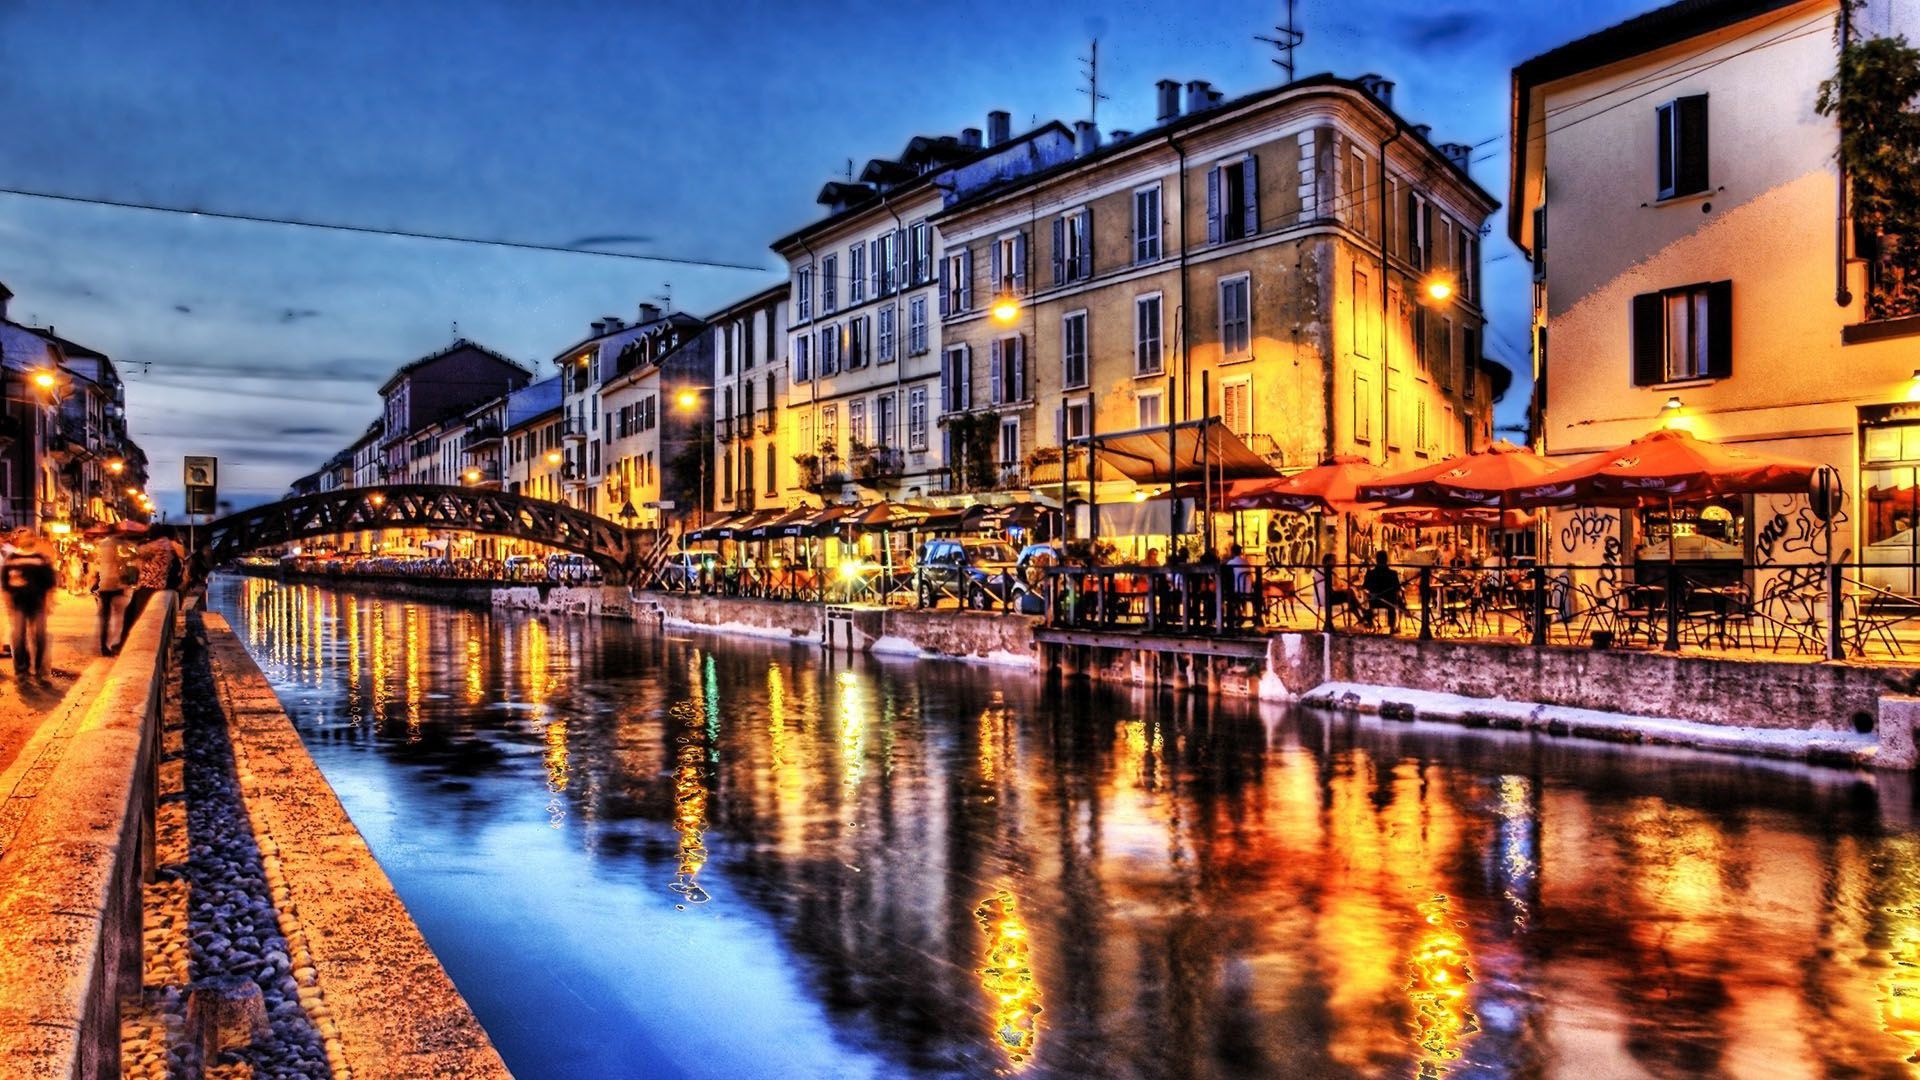 Night In Venice Wallpaper Collection